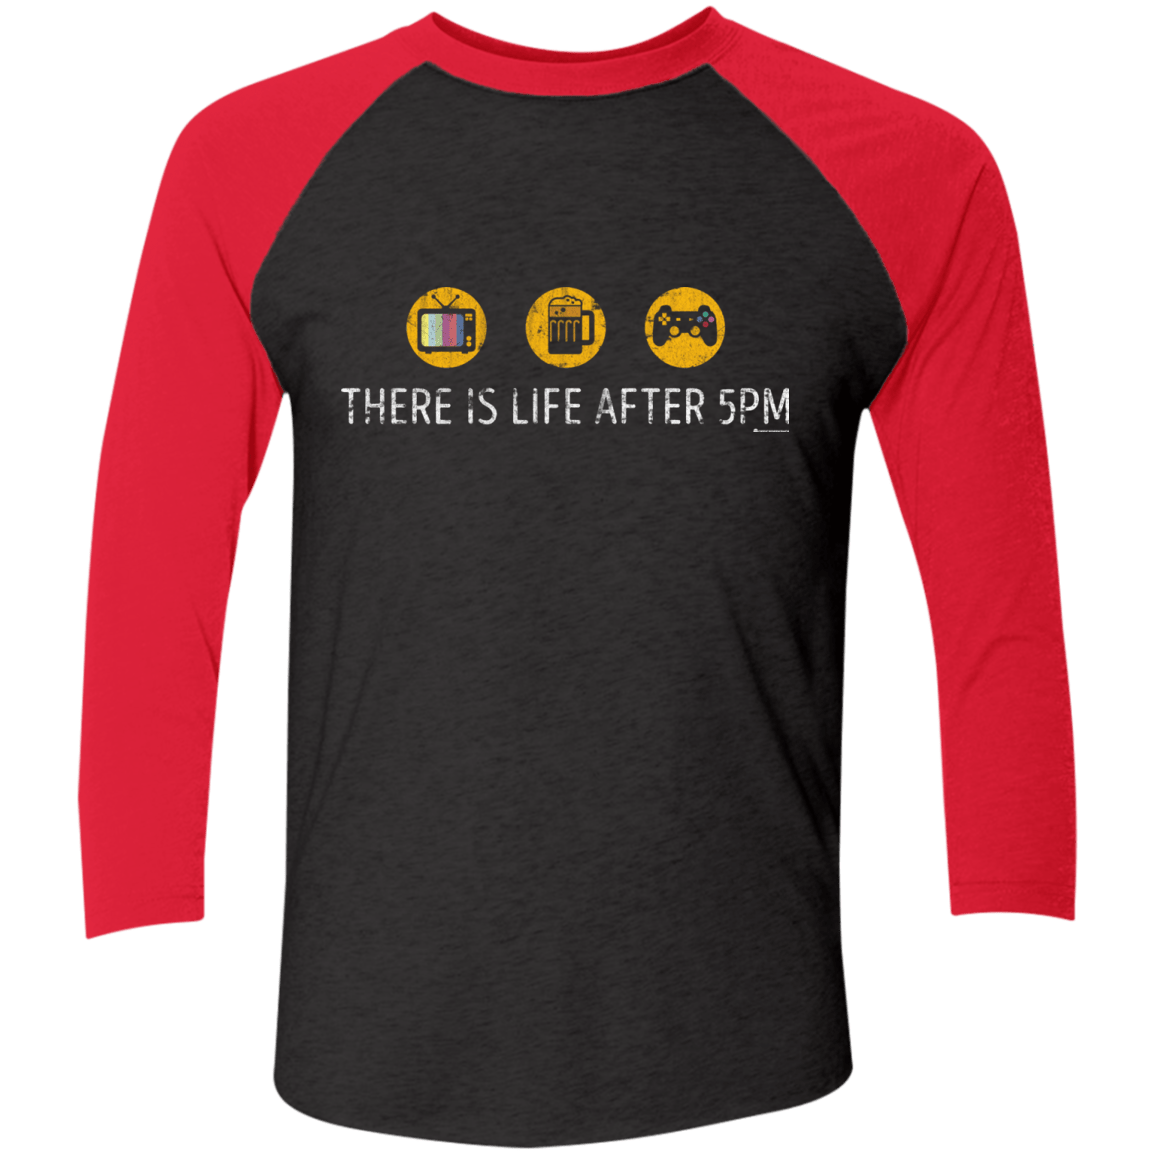 T-Shirts Vintage Black/Vintage Red / X-Small There Is Life After 5PM Men's Triblend 3/4 Sleeve